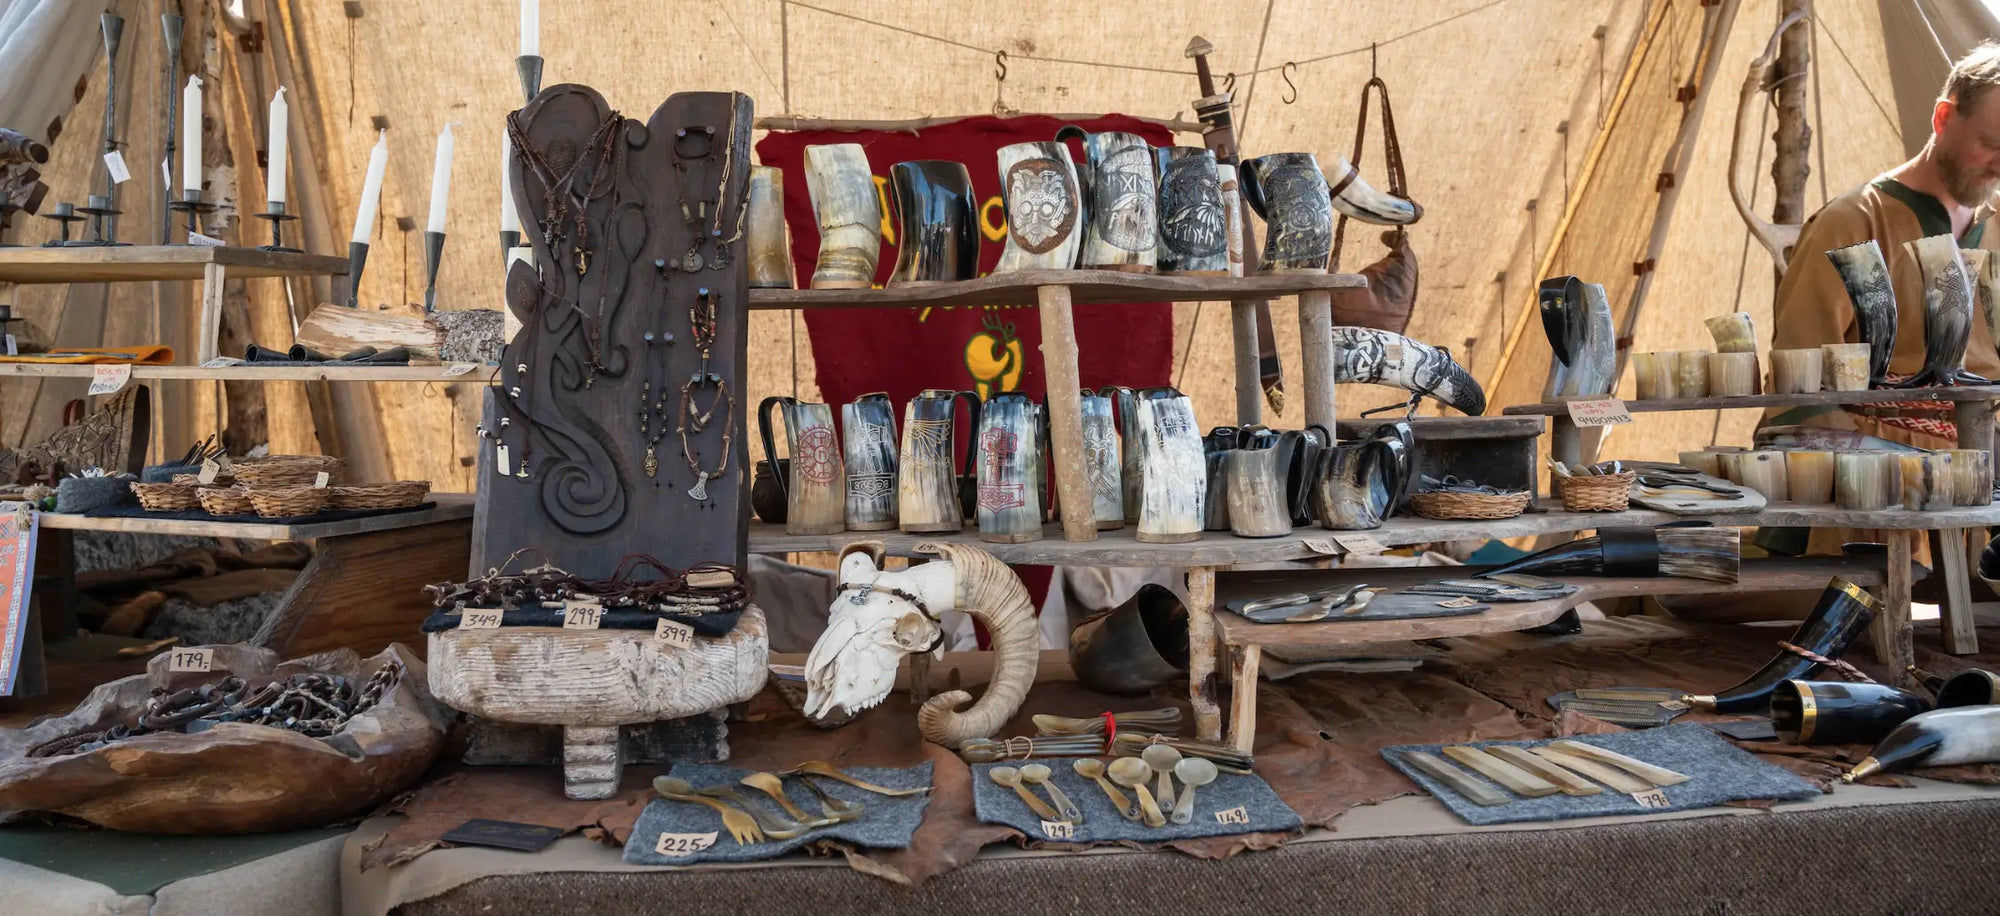 A display of Viking objects on a table, including cups, horns, candles and ancient Norse jewelry